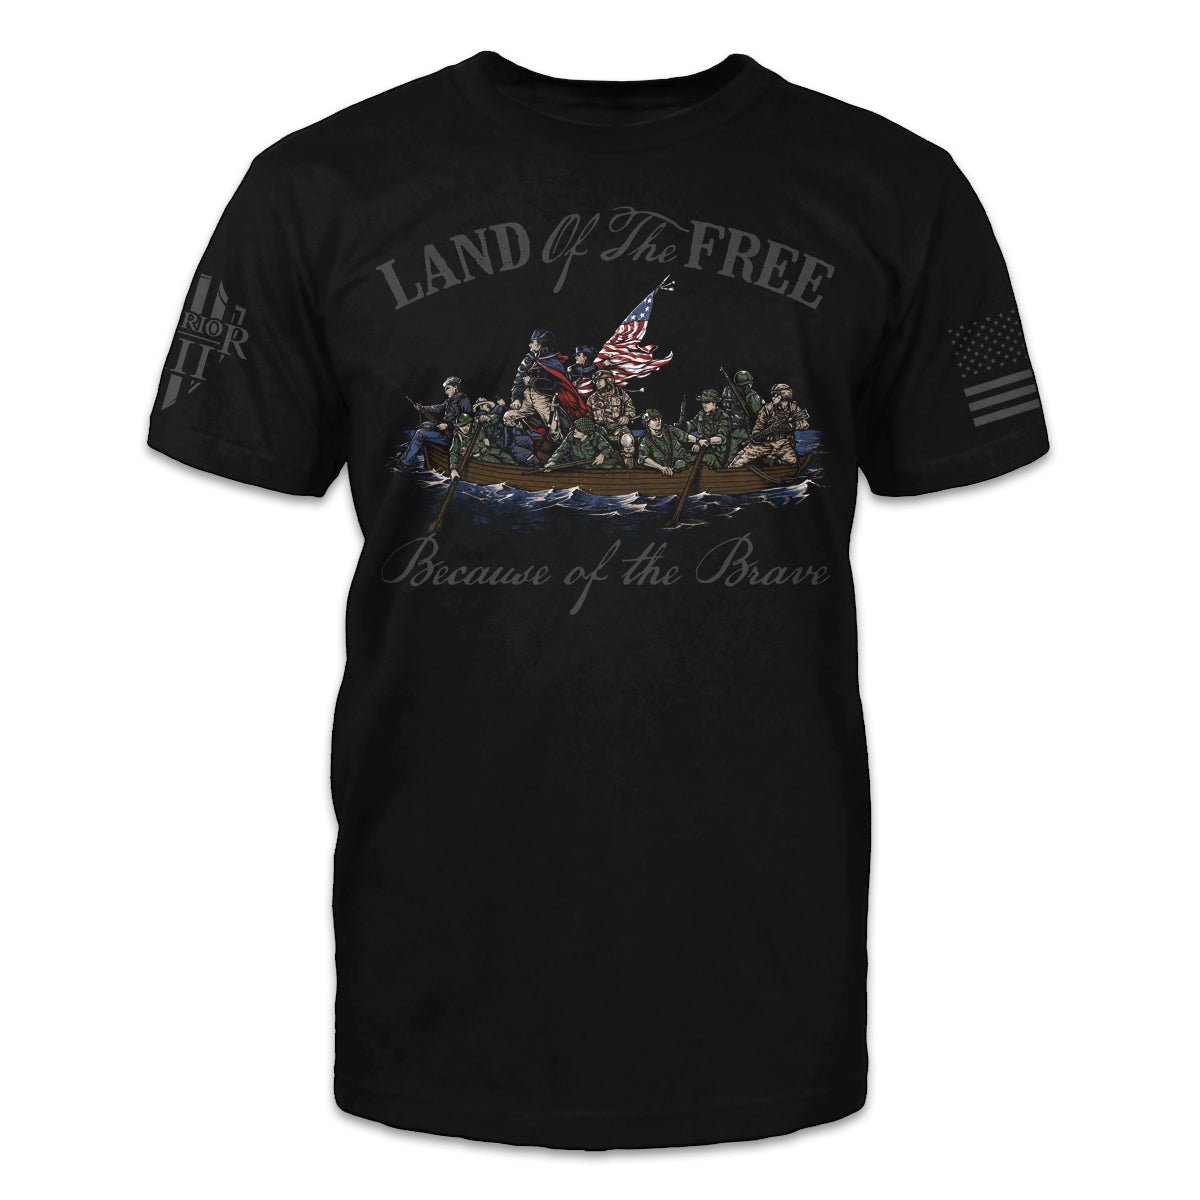 A black t-shirt with the words "land of the free" with figures that represent the Revolutionary War, Spanish-American War, World War I, World War II, the Korean War, the Vietnam War, the Gulf War, and the War in Afghanistan printed on the front of the shirt.